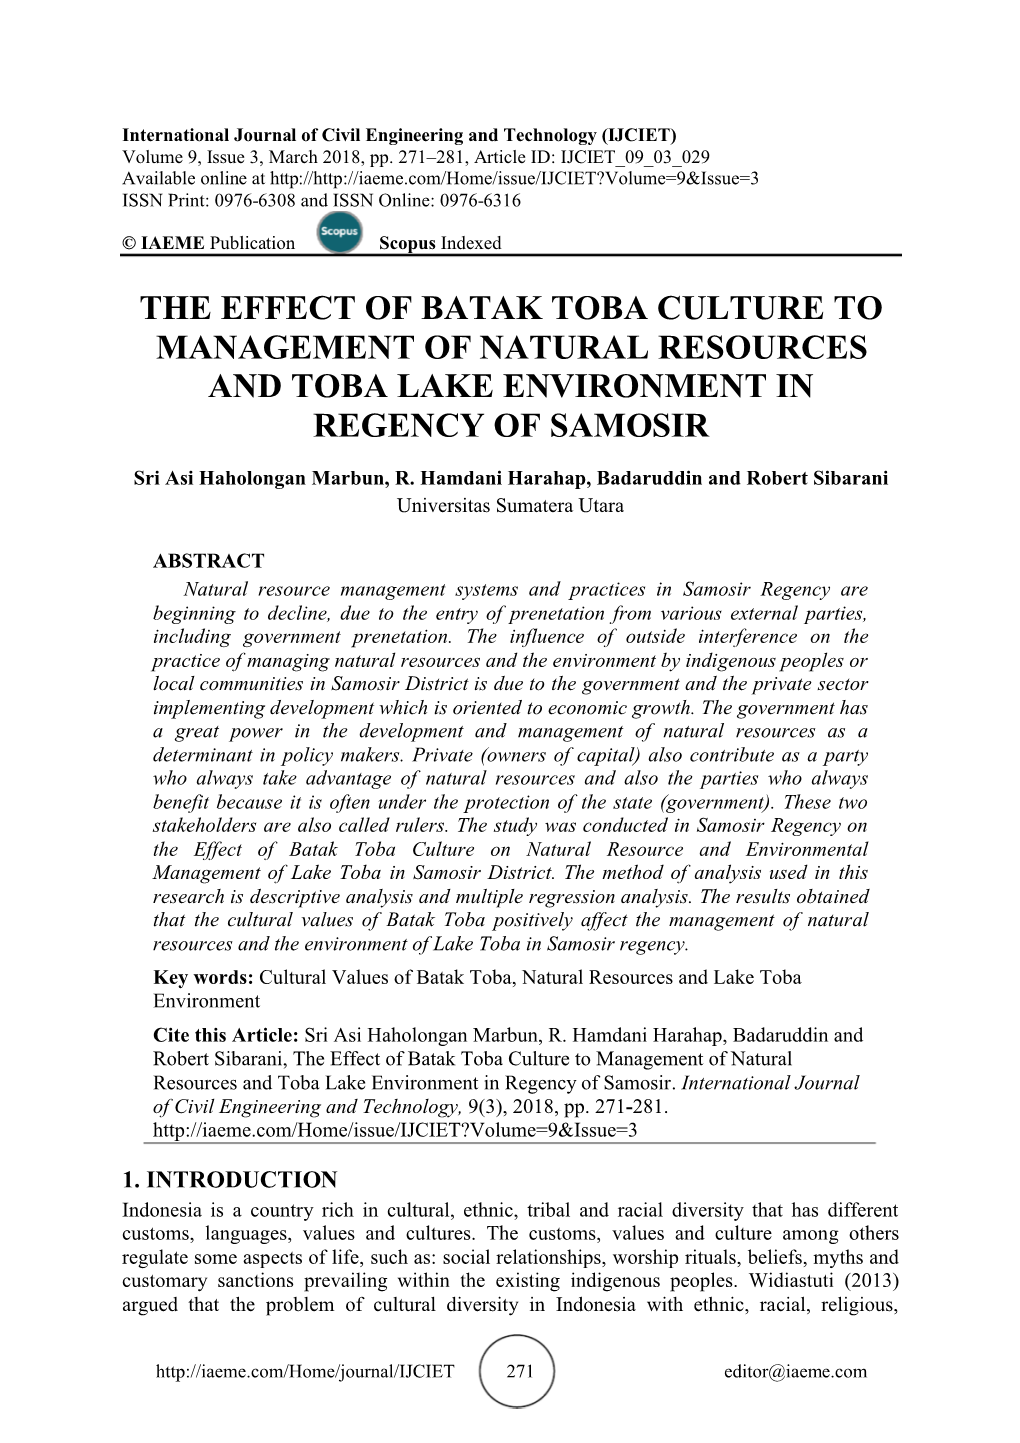 The Effect of Batak Toba Culture to Management of Natural Resources and Toba Lake Environment in Regency of Samosir